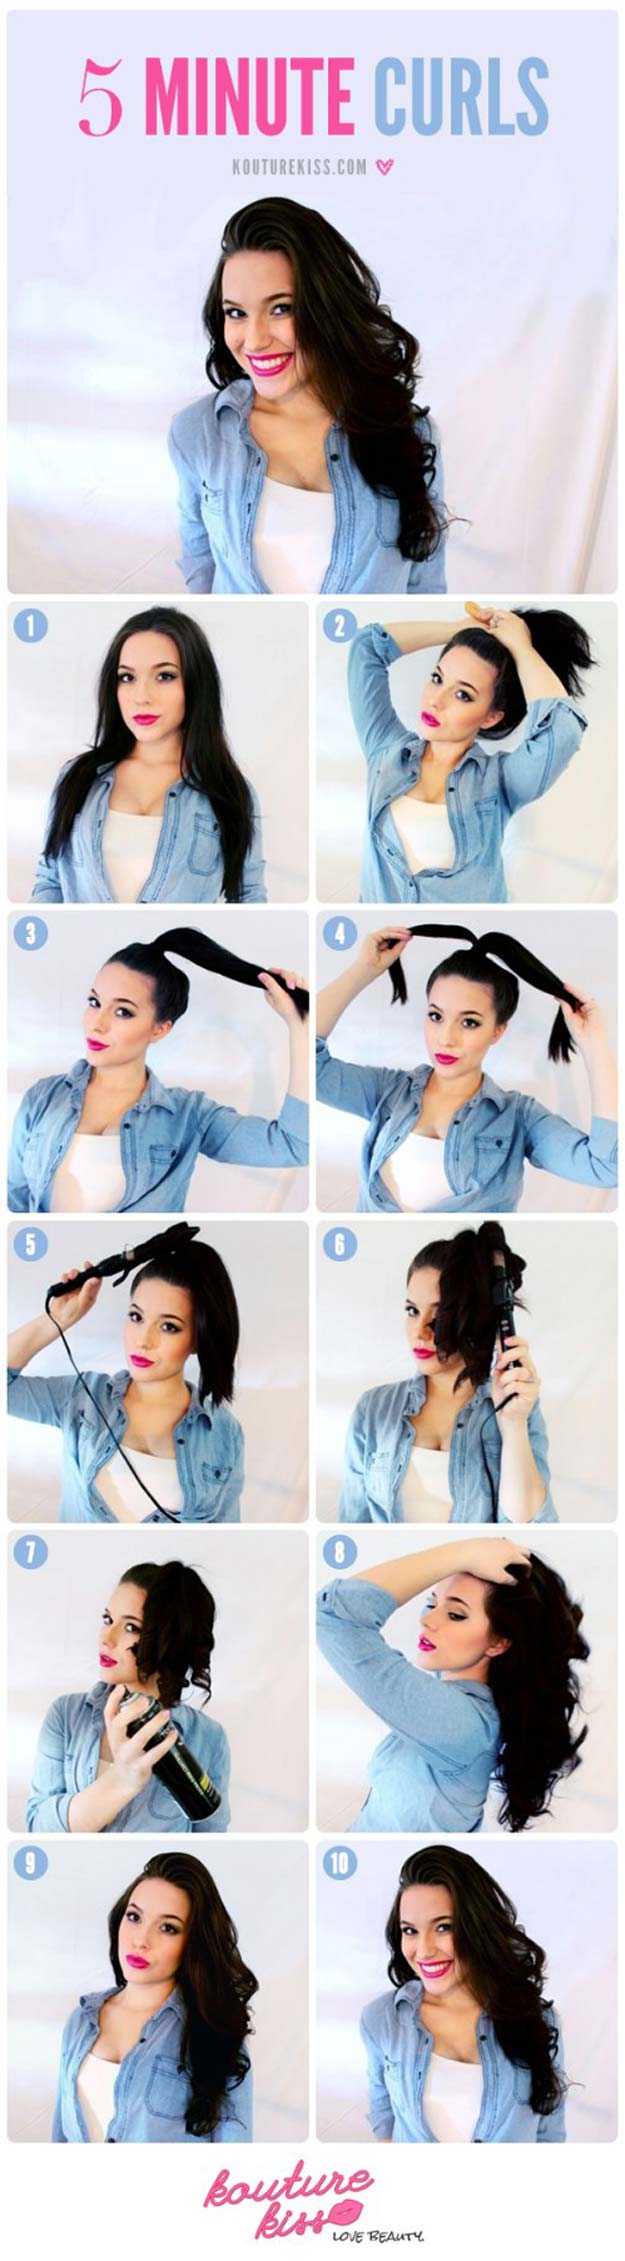 Cool and Easy DIY Hairstyles - 5 Minute Curls - Quick and Easy Ideas for Back to School Styles for Medium, Short and Long Hair - Fun Tips and Best Step by Step Tutorials for Teens, Prom, Weddings, Special Occasions and Work. Up dos, Braids, Top Knots and Buns, Super Summer Looks http://diyprojectsforteens.com/diy-cool-easy-hairstyles